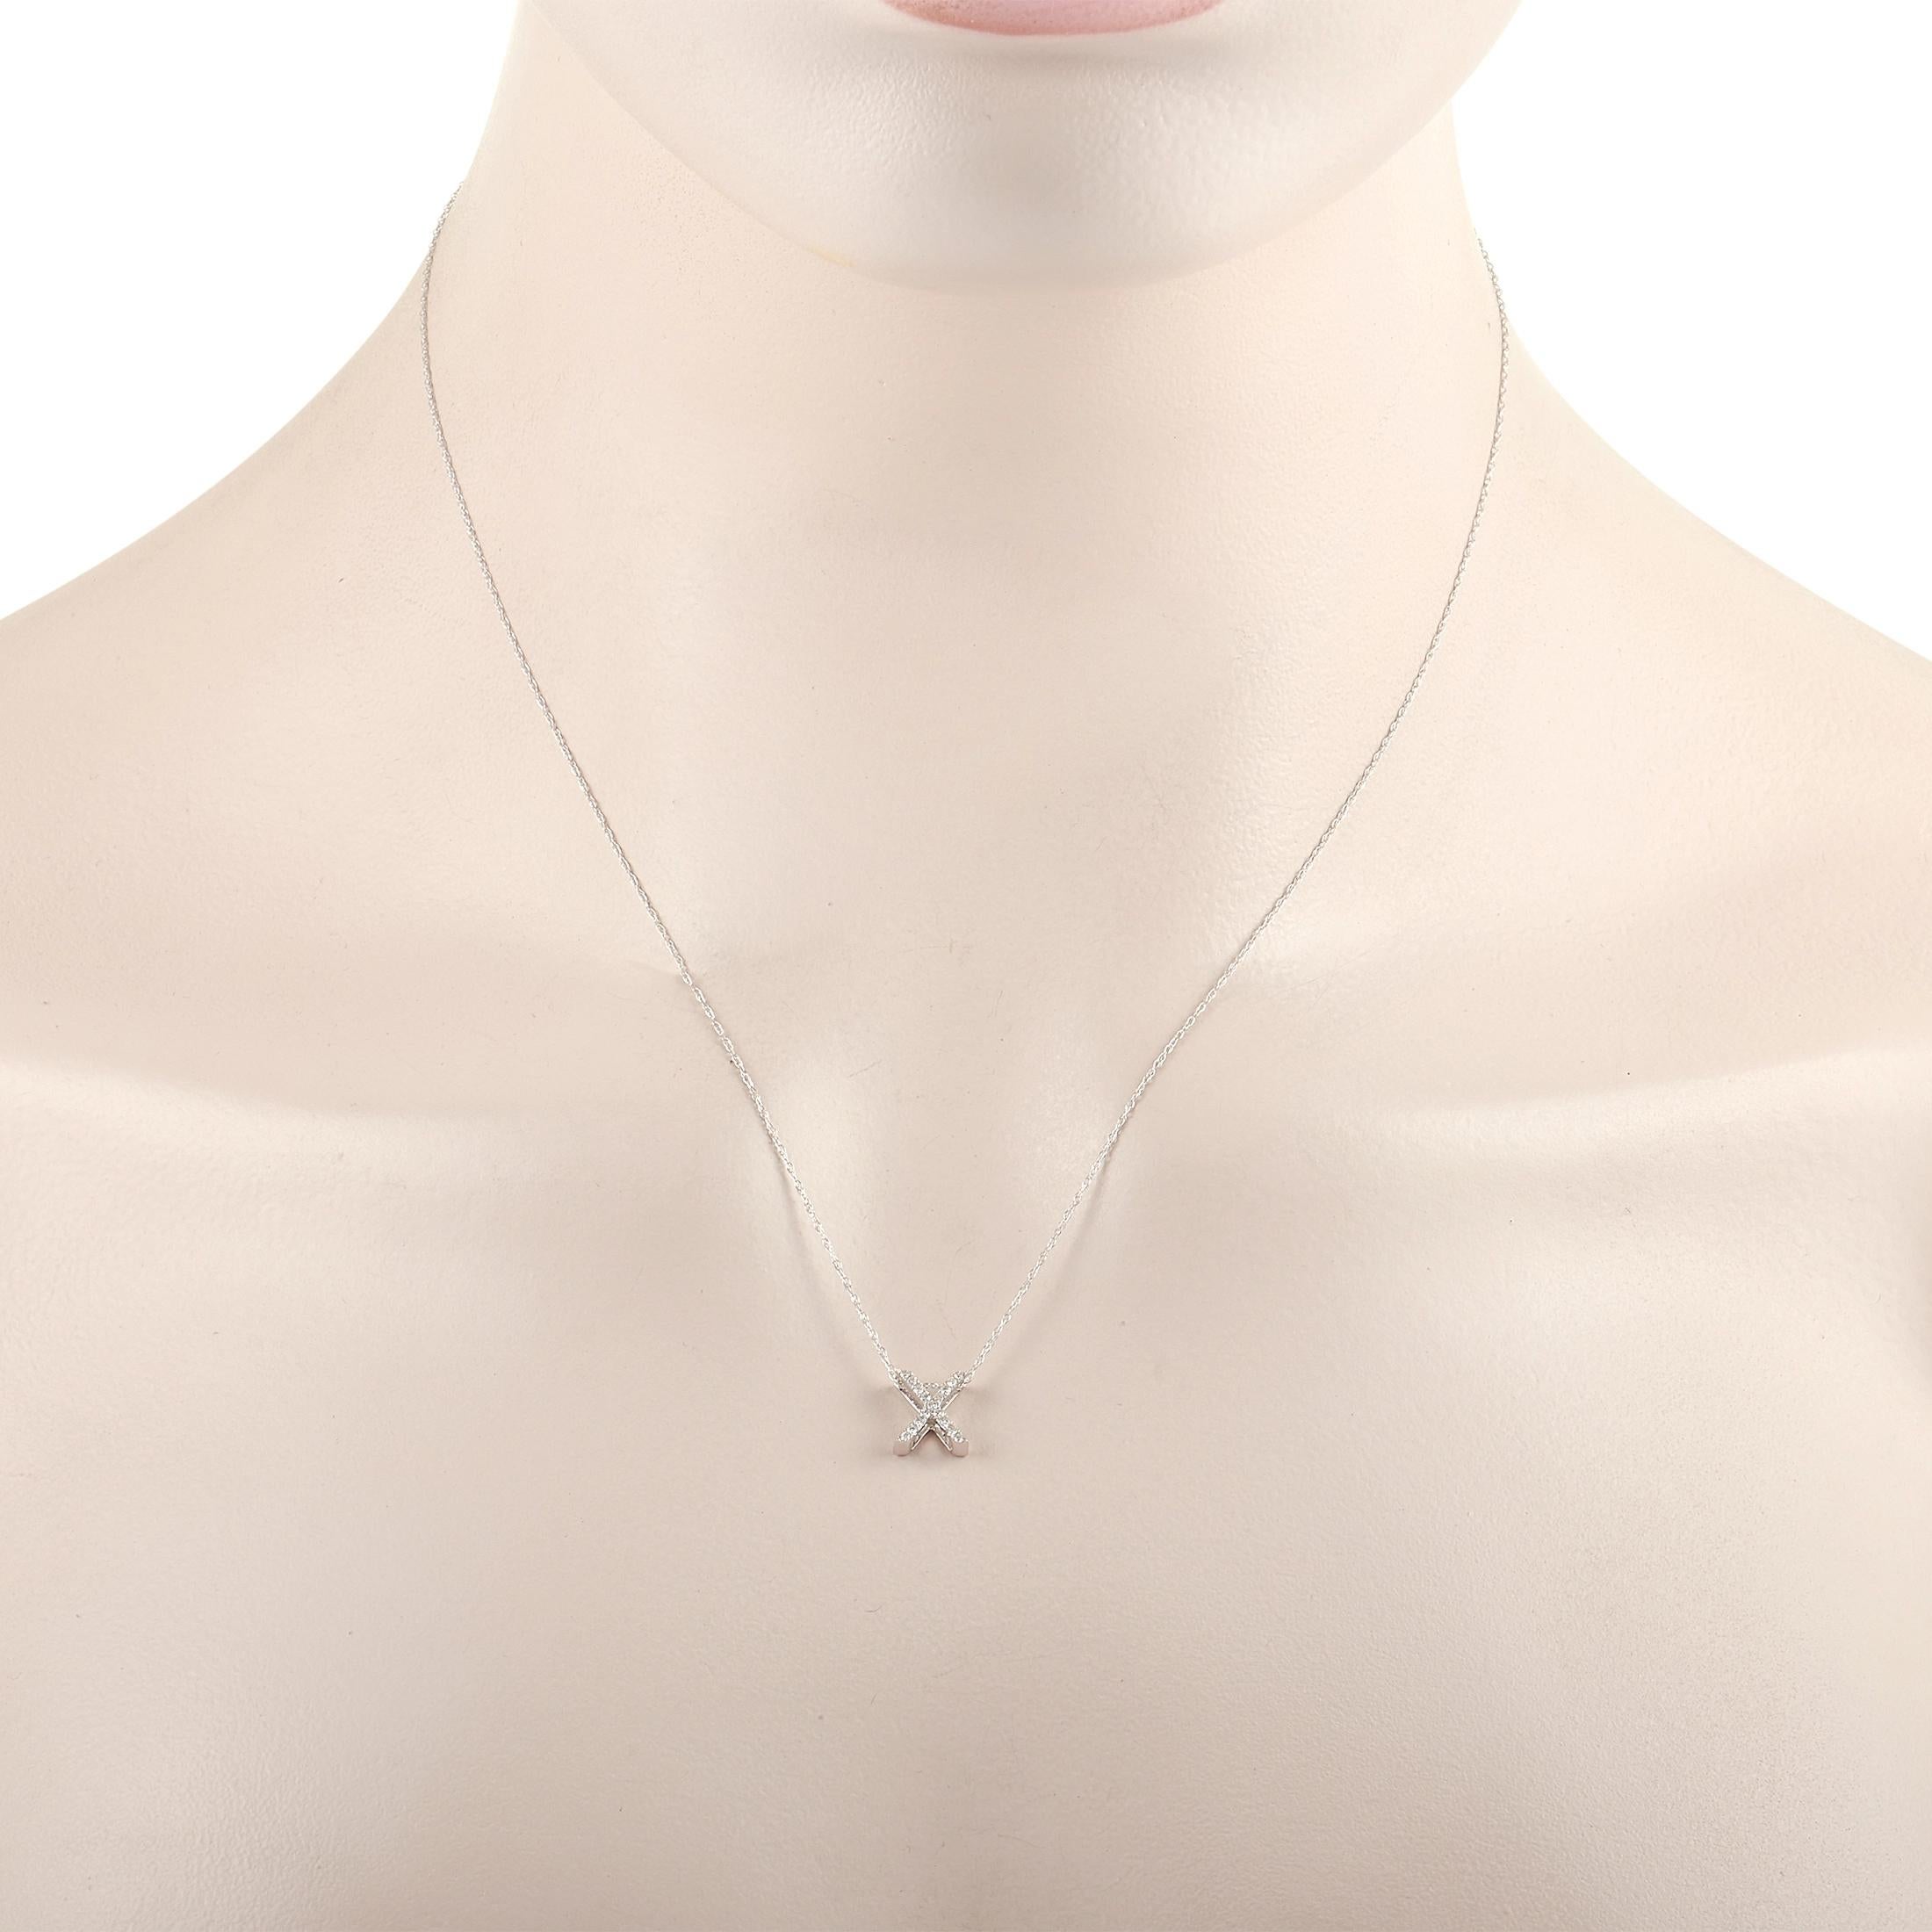 This pretty LB Exclusive 14K White Gold 0.10 ct Diamond Initial ‘X’ Necklace is made with a delicate 14K white gold chain and features a small white gold pendant shaped like the letter ‘X’ and set with 0.10 carats of round diamonds throughout. The